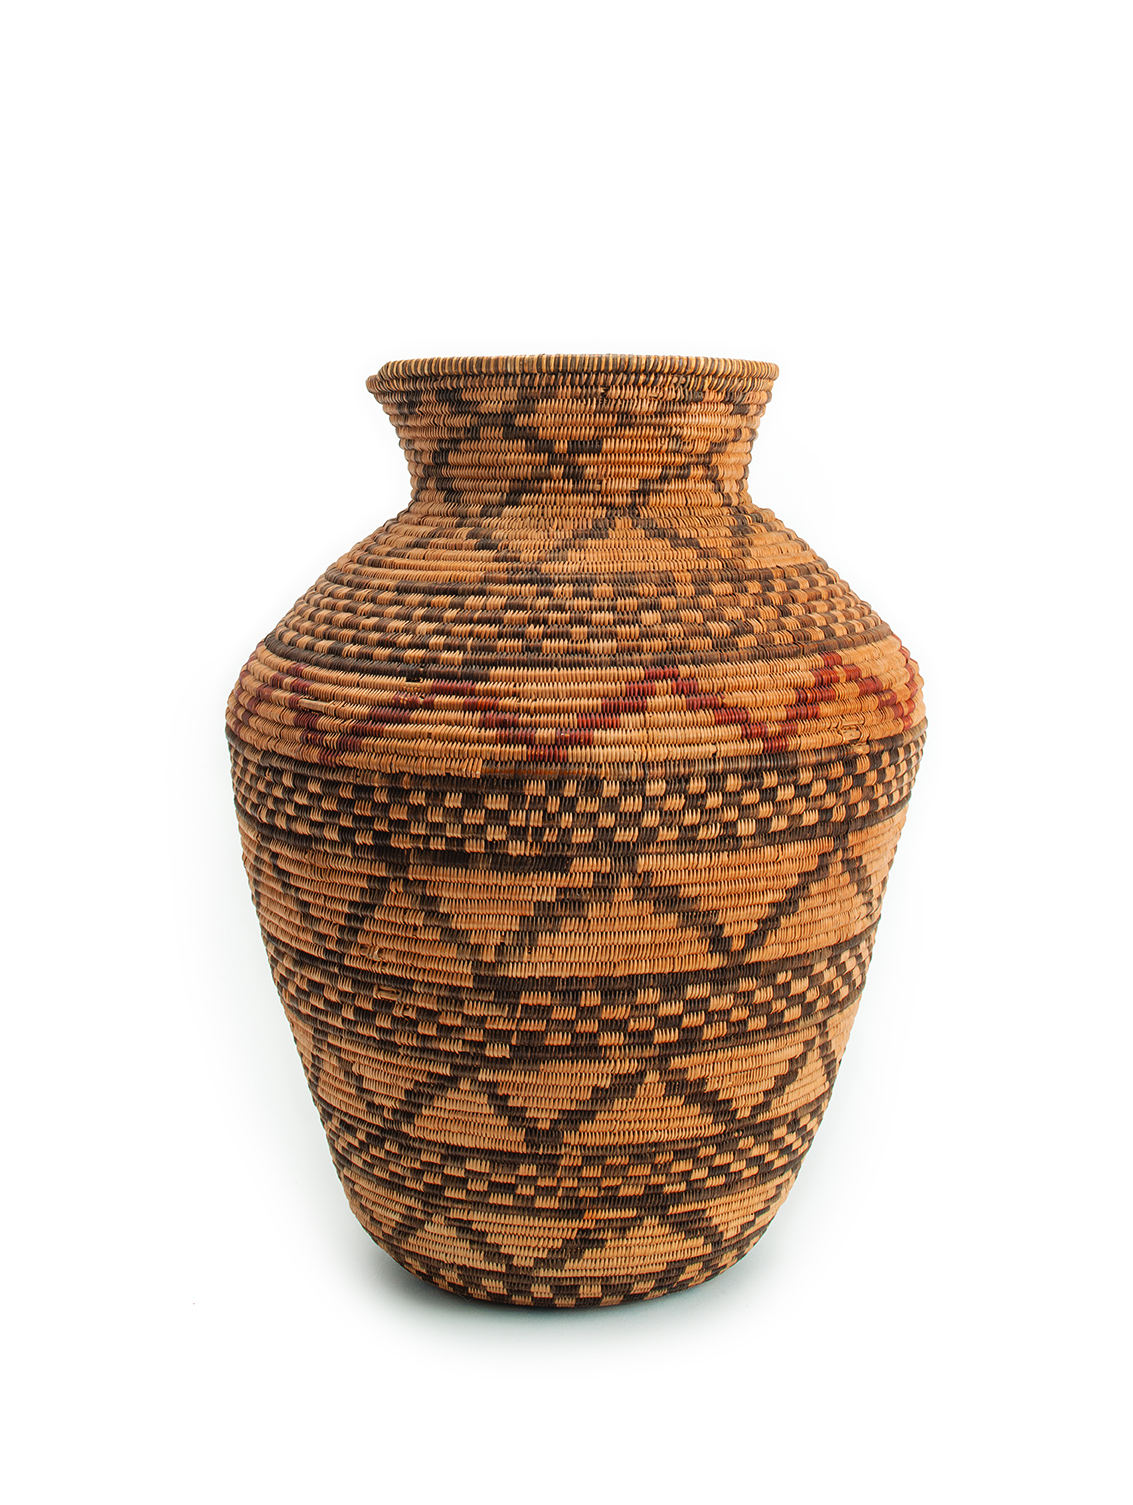 A large, woven basket with intricate patterns in natural brown and black colors, and a slight flared opening at the top.